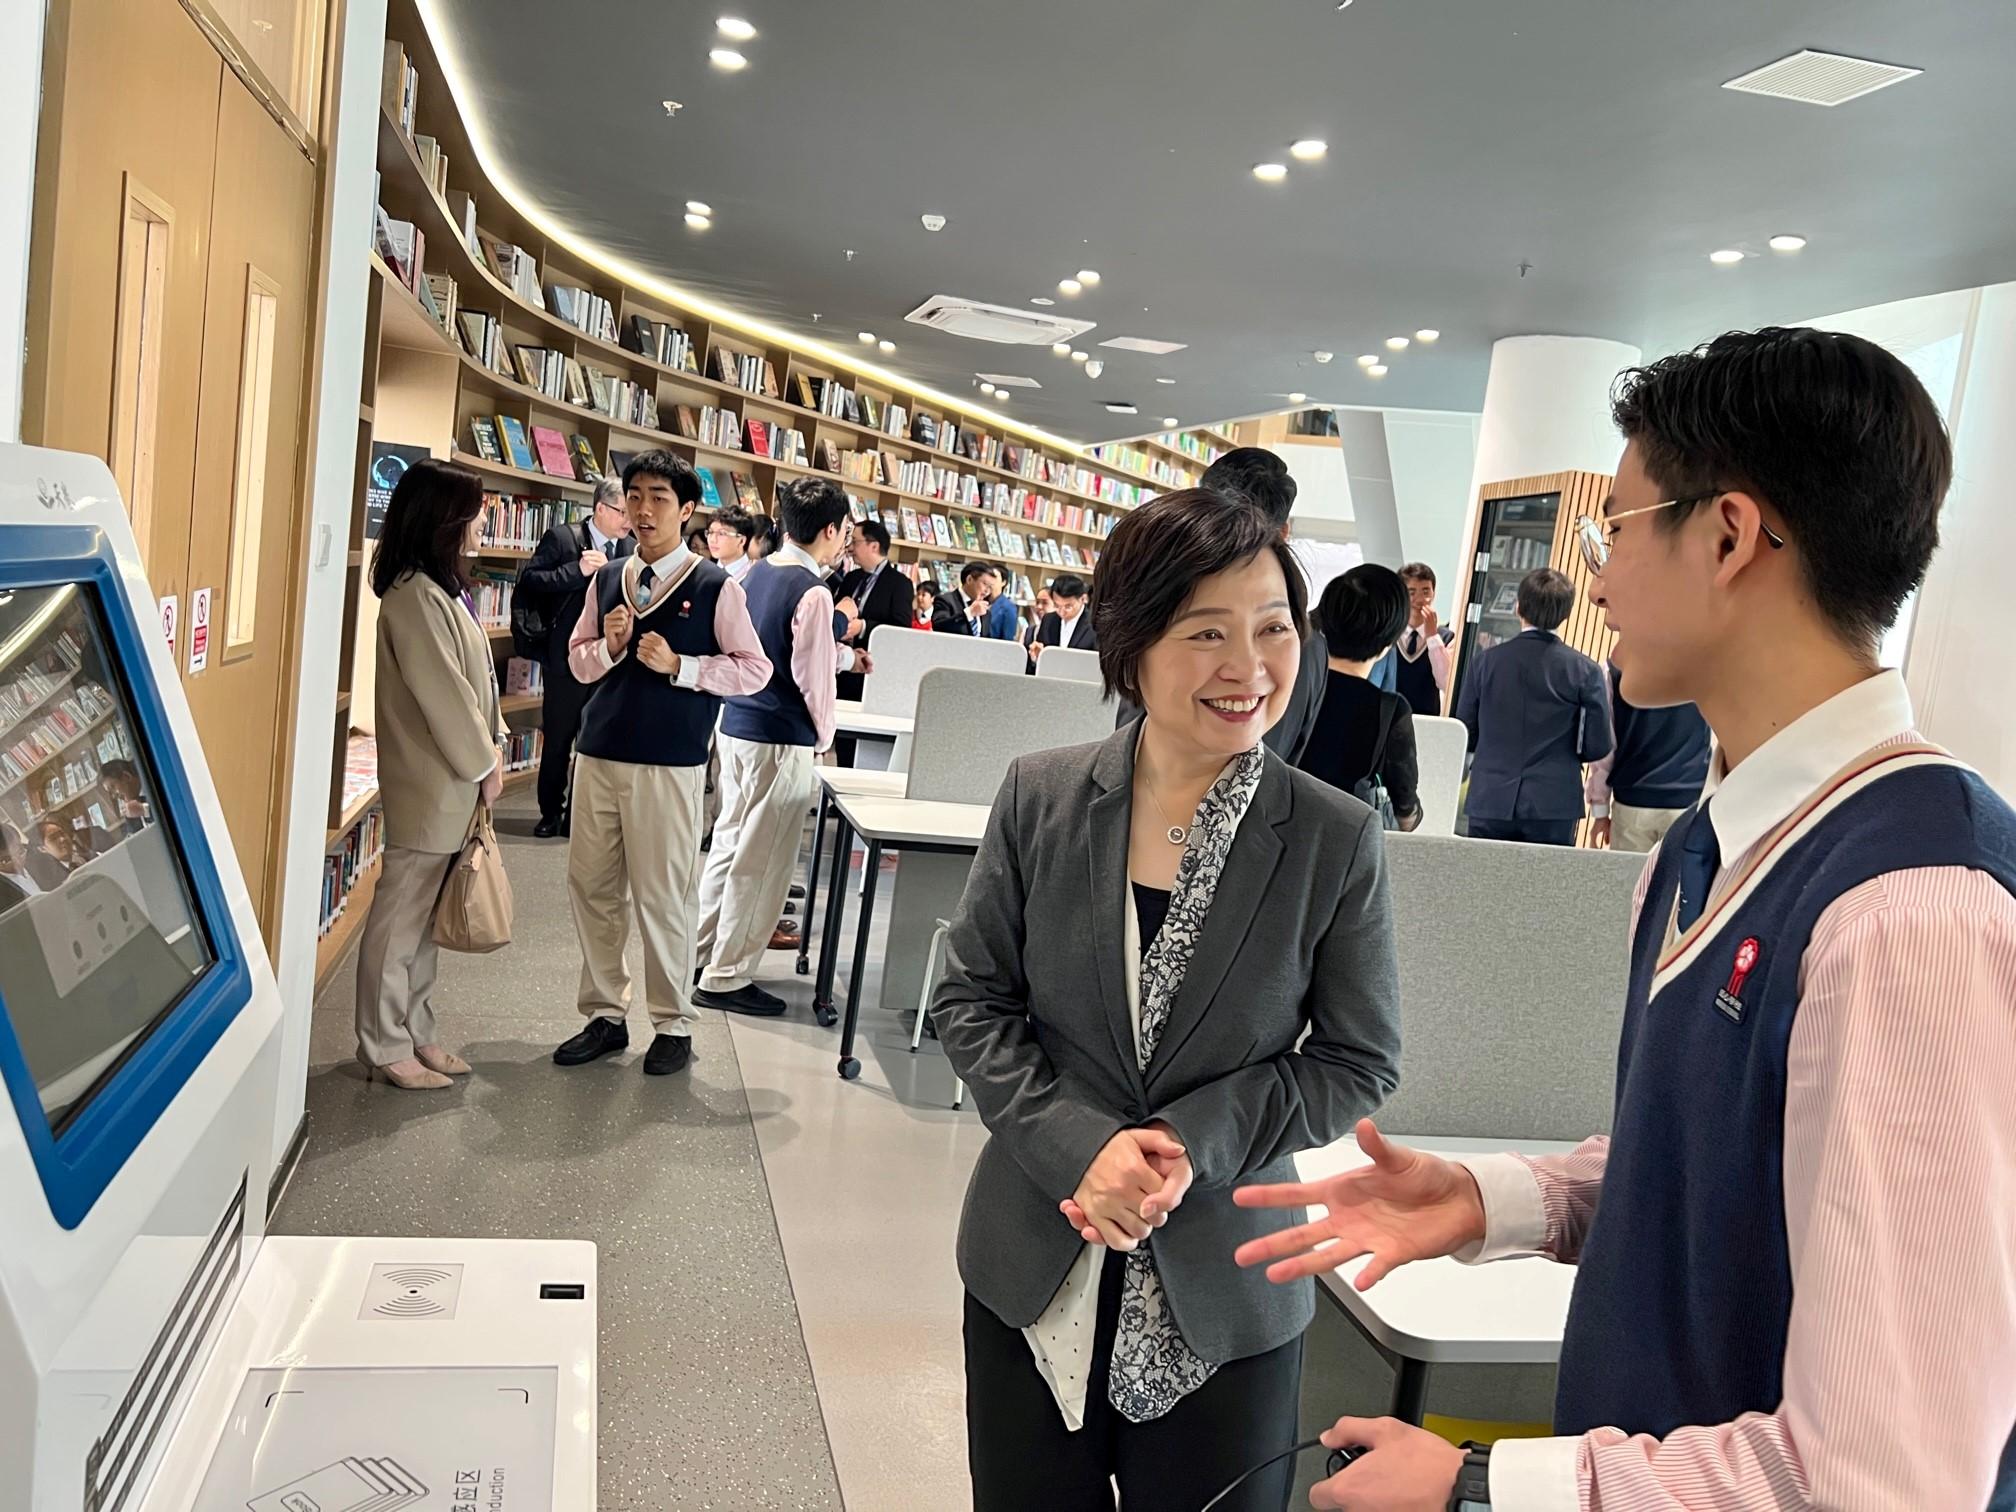 The Secretary for Education, Dr Choi Yuk-lin, visited Minxin Hong Kong School (Guangzhou Nansha) today (March 10) to understand more about the study situation of Hong Kong students on the Mainland. Photo shows Dr Choi (left) being briefed by a student on the library facilities.